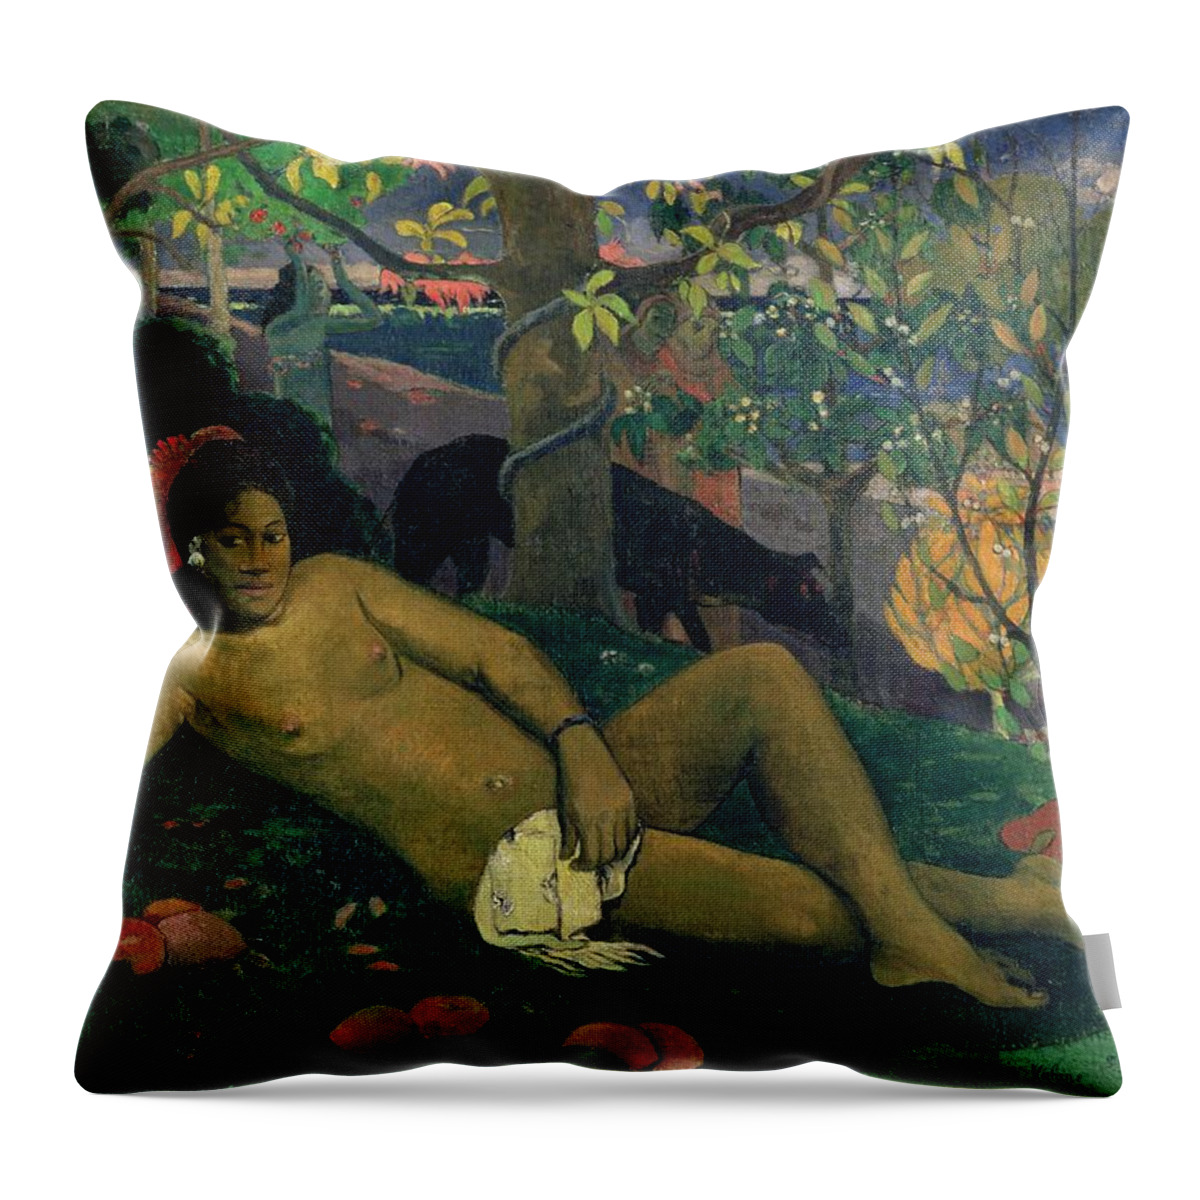 Arii Throw Pillow featuring the painting The Kings Wife by Paul Gauguin